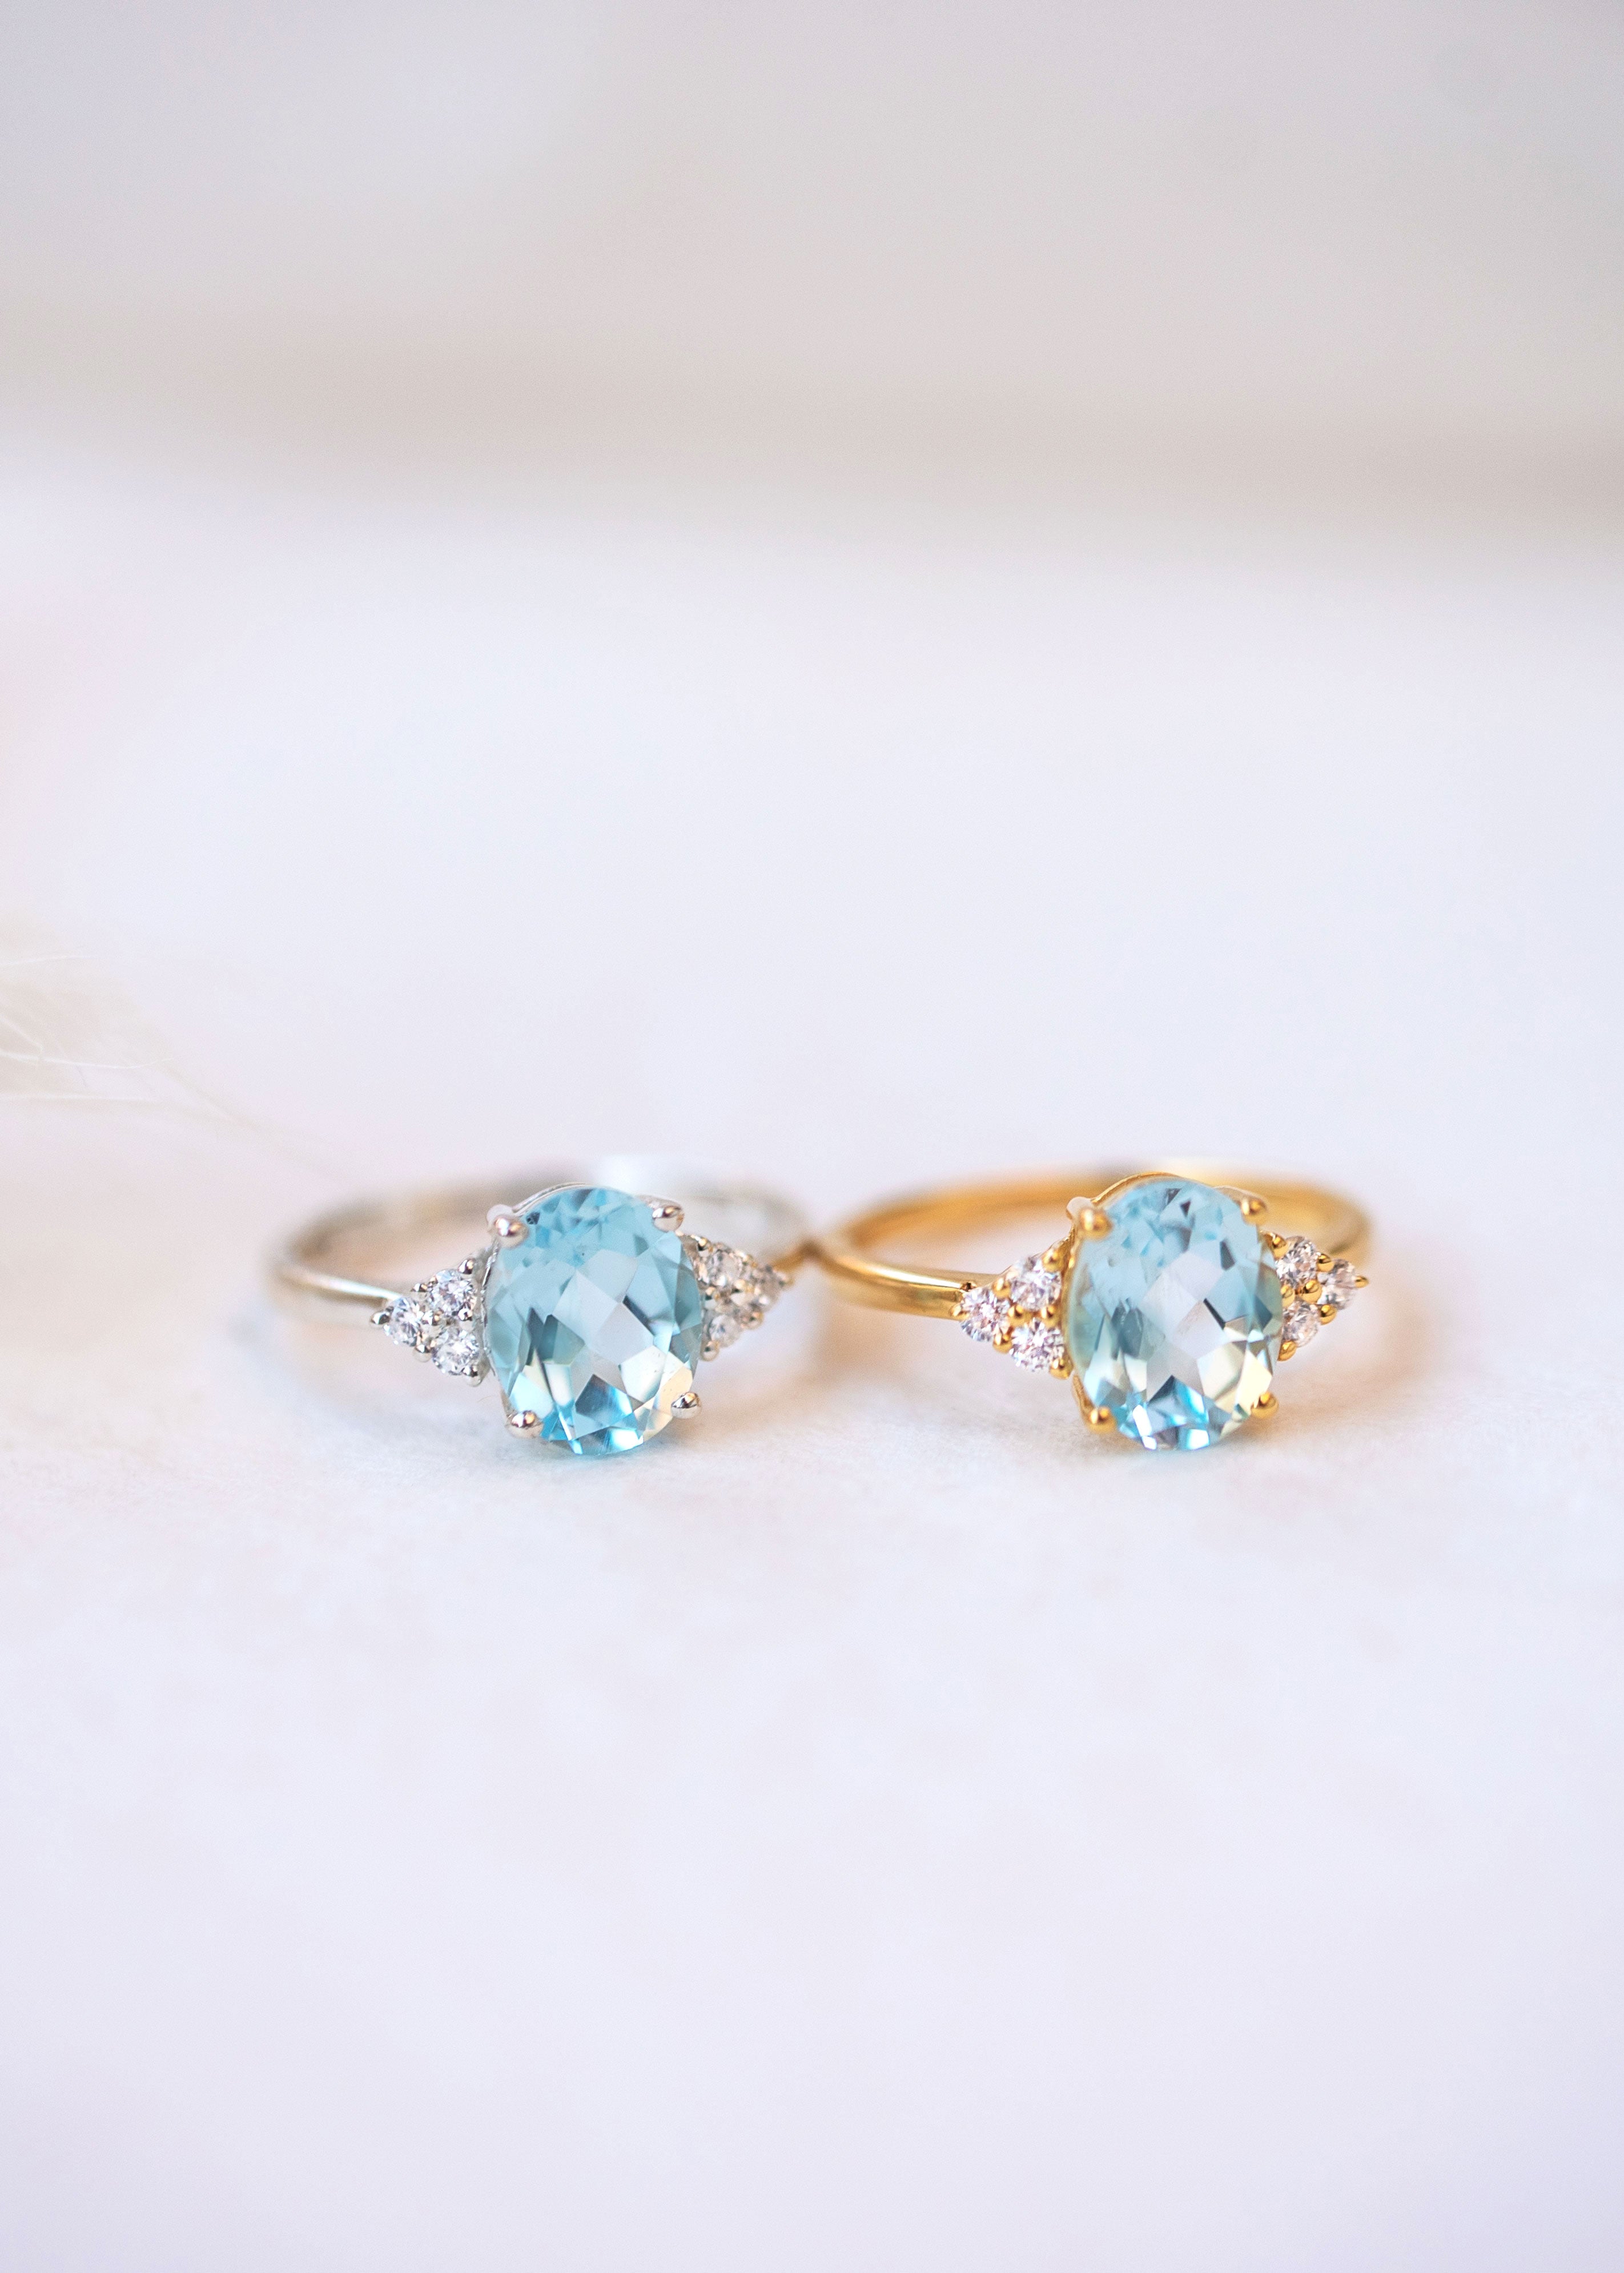 Blue topaz Engagement Gemstone Proposal Rings for women gifts for her